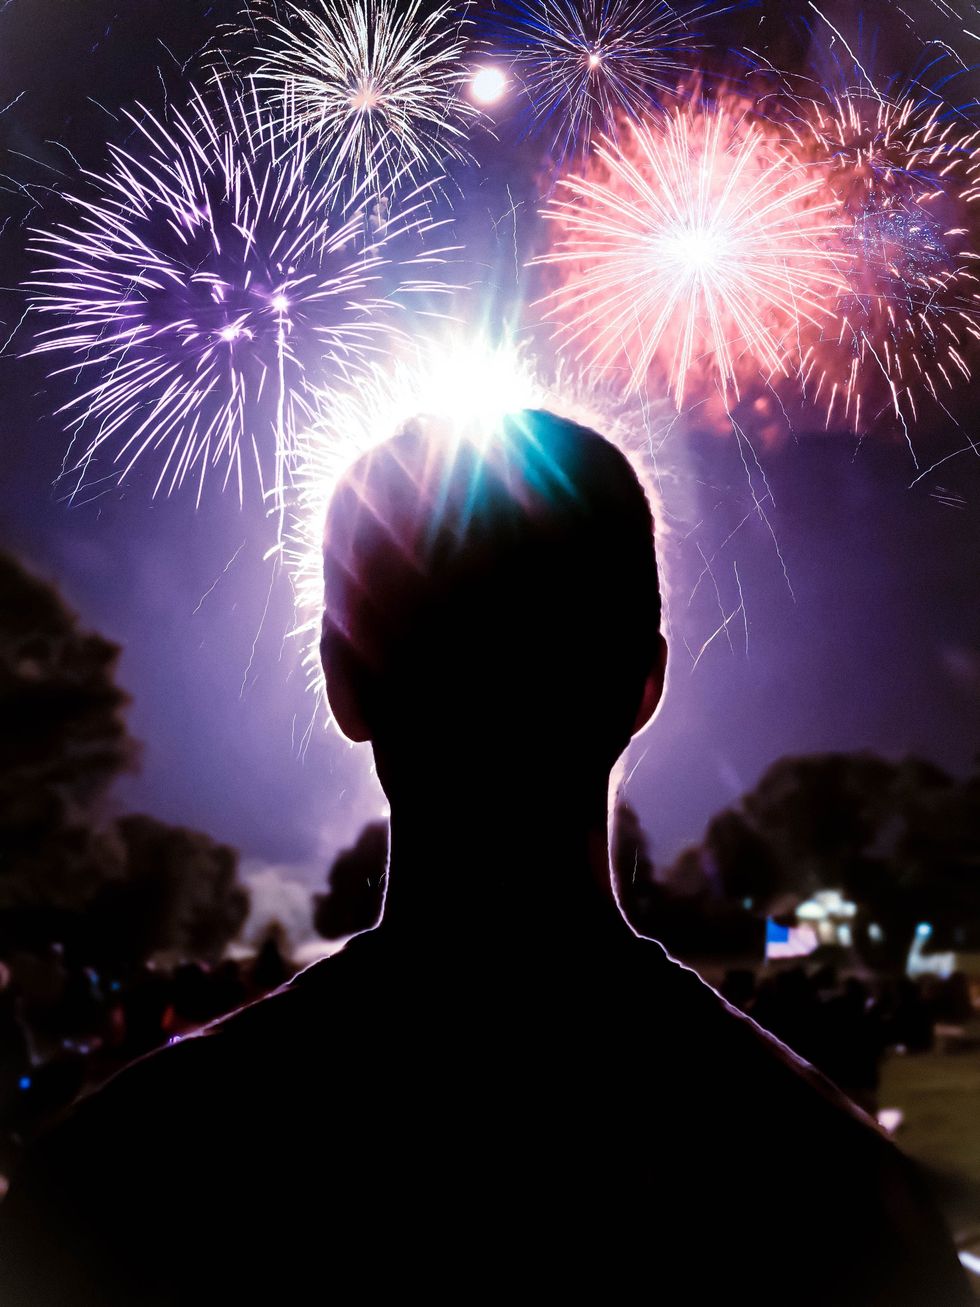 Where To Watch Firework Shows In Colorado This Fourth of July